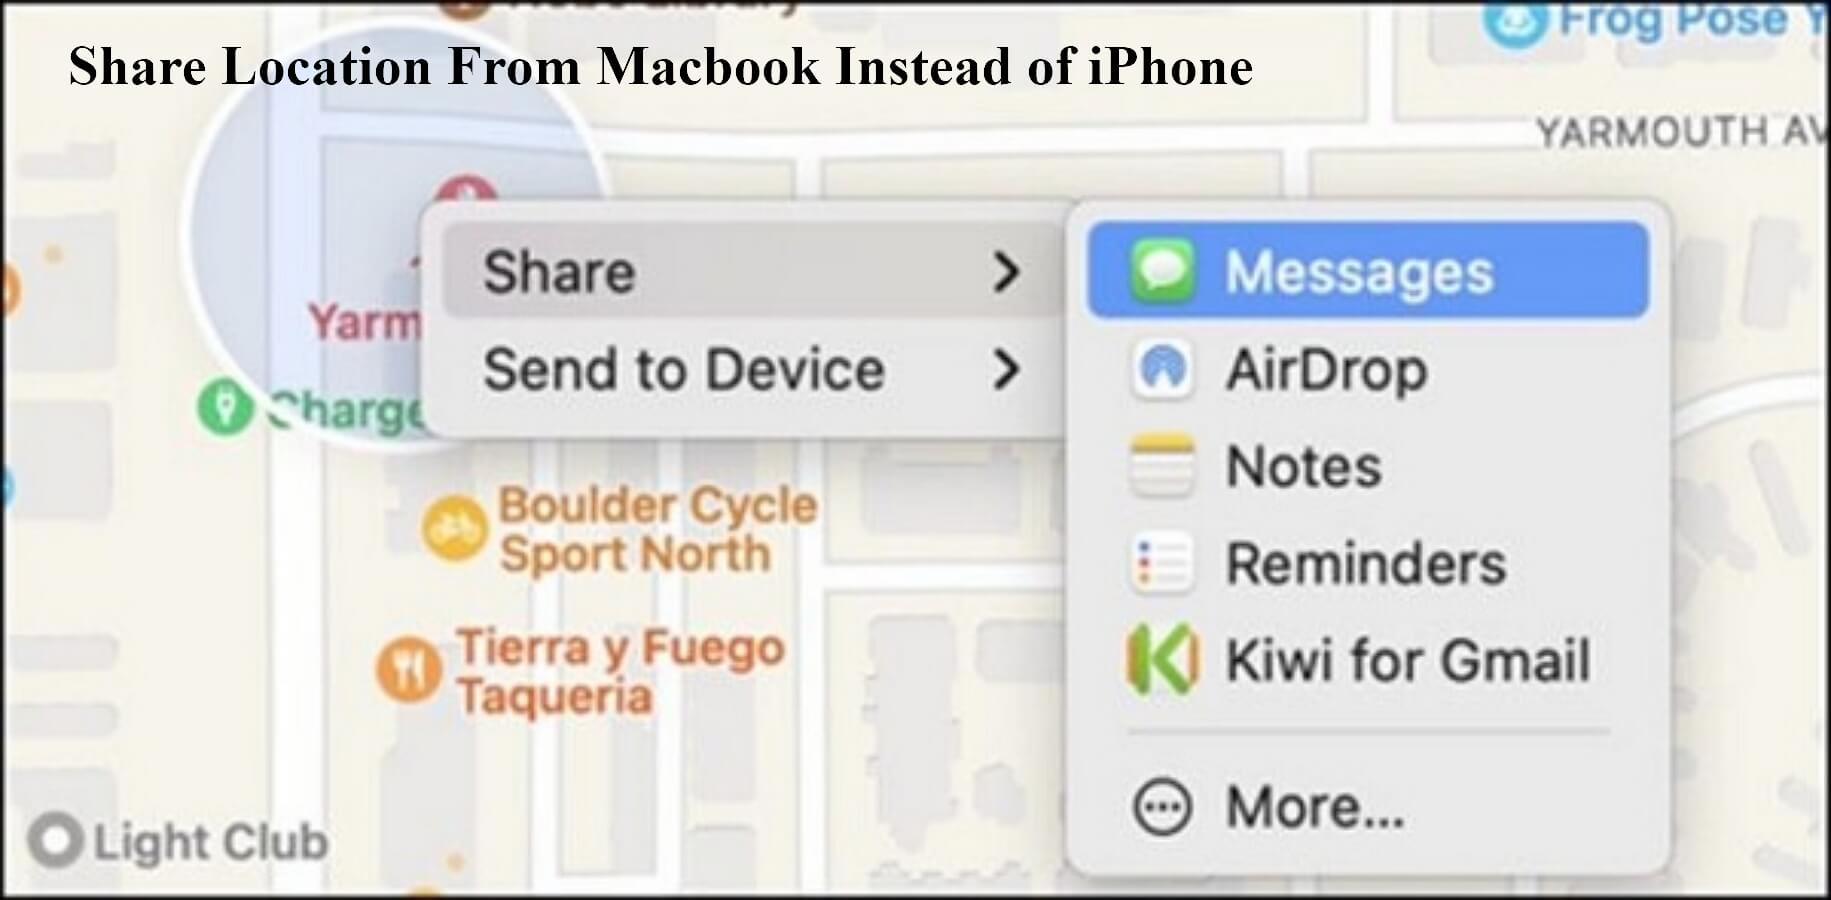 How Does The MacBook Location Function?